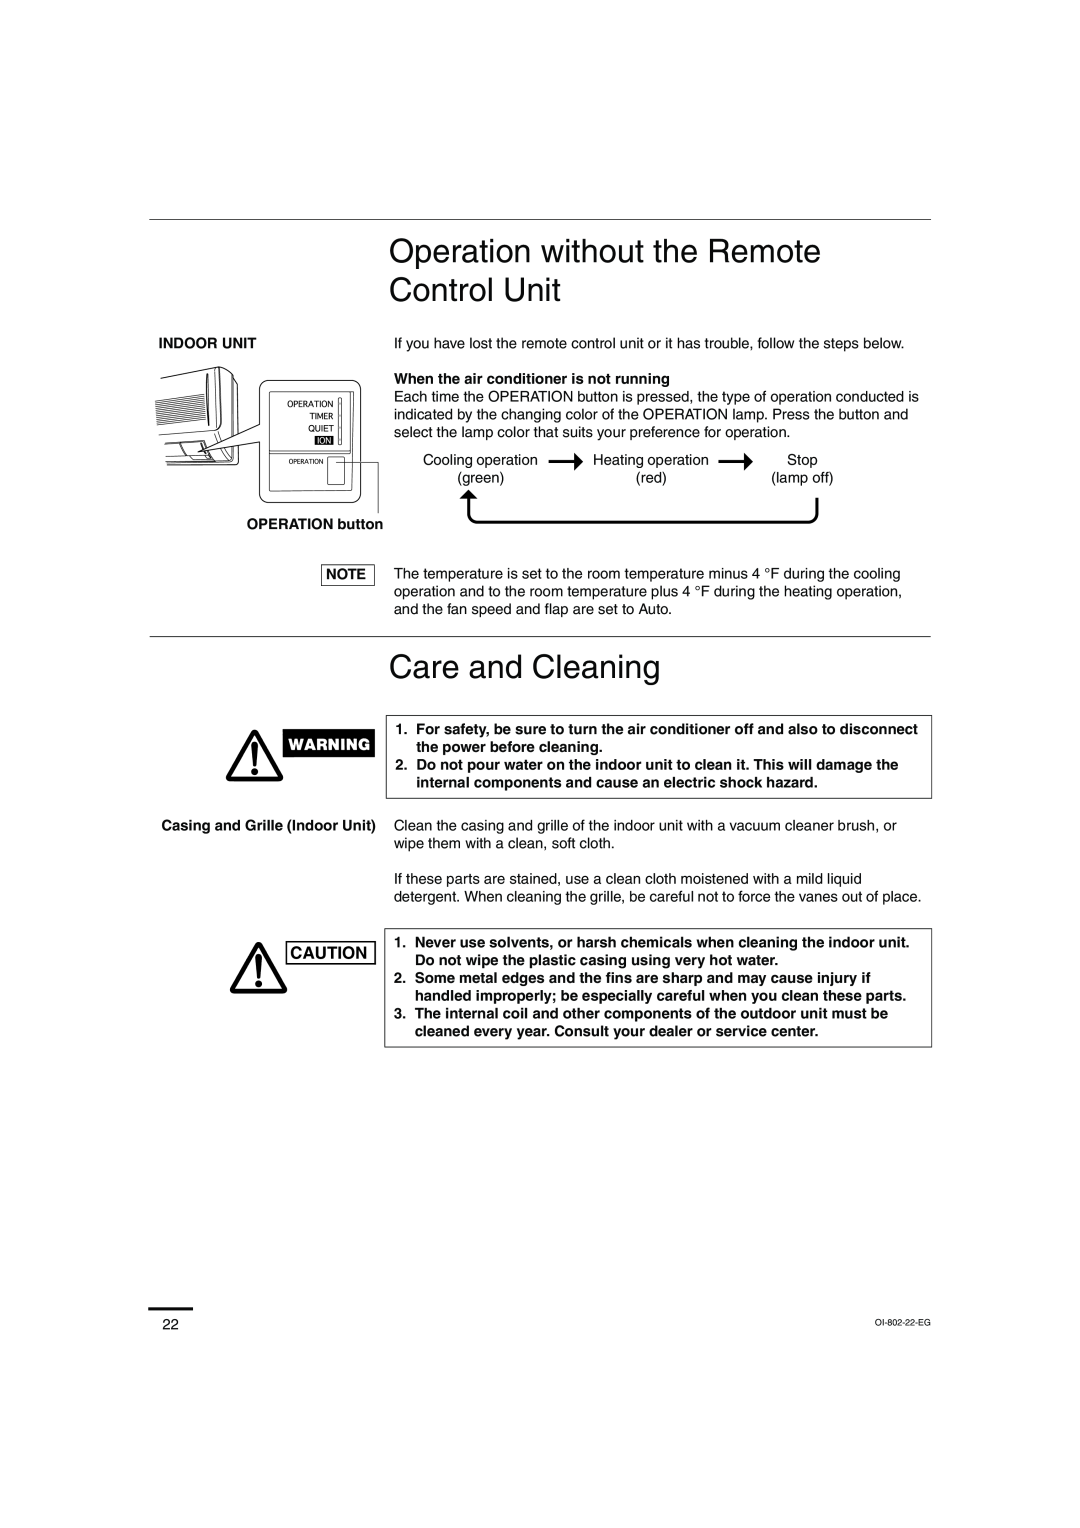 Sanyo KHS1271, KHS0971 instruction manual Operation without the Remote Control Unit, Care and Cleaning, OI-802-22-EG 